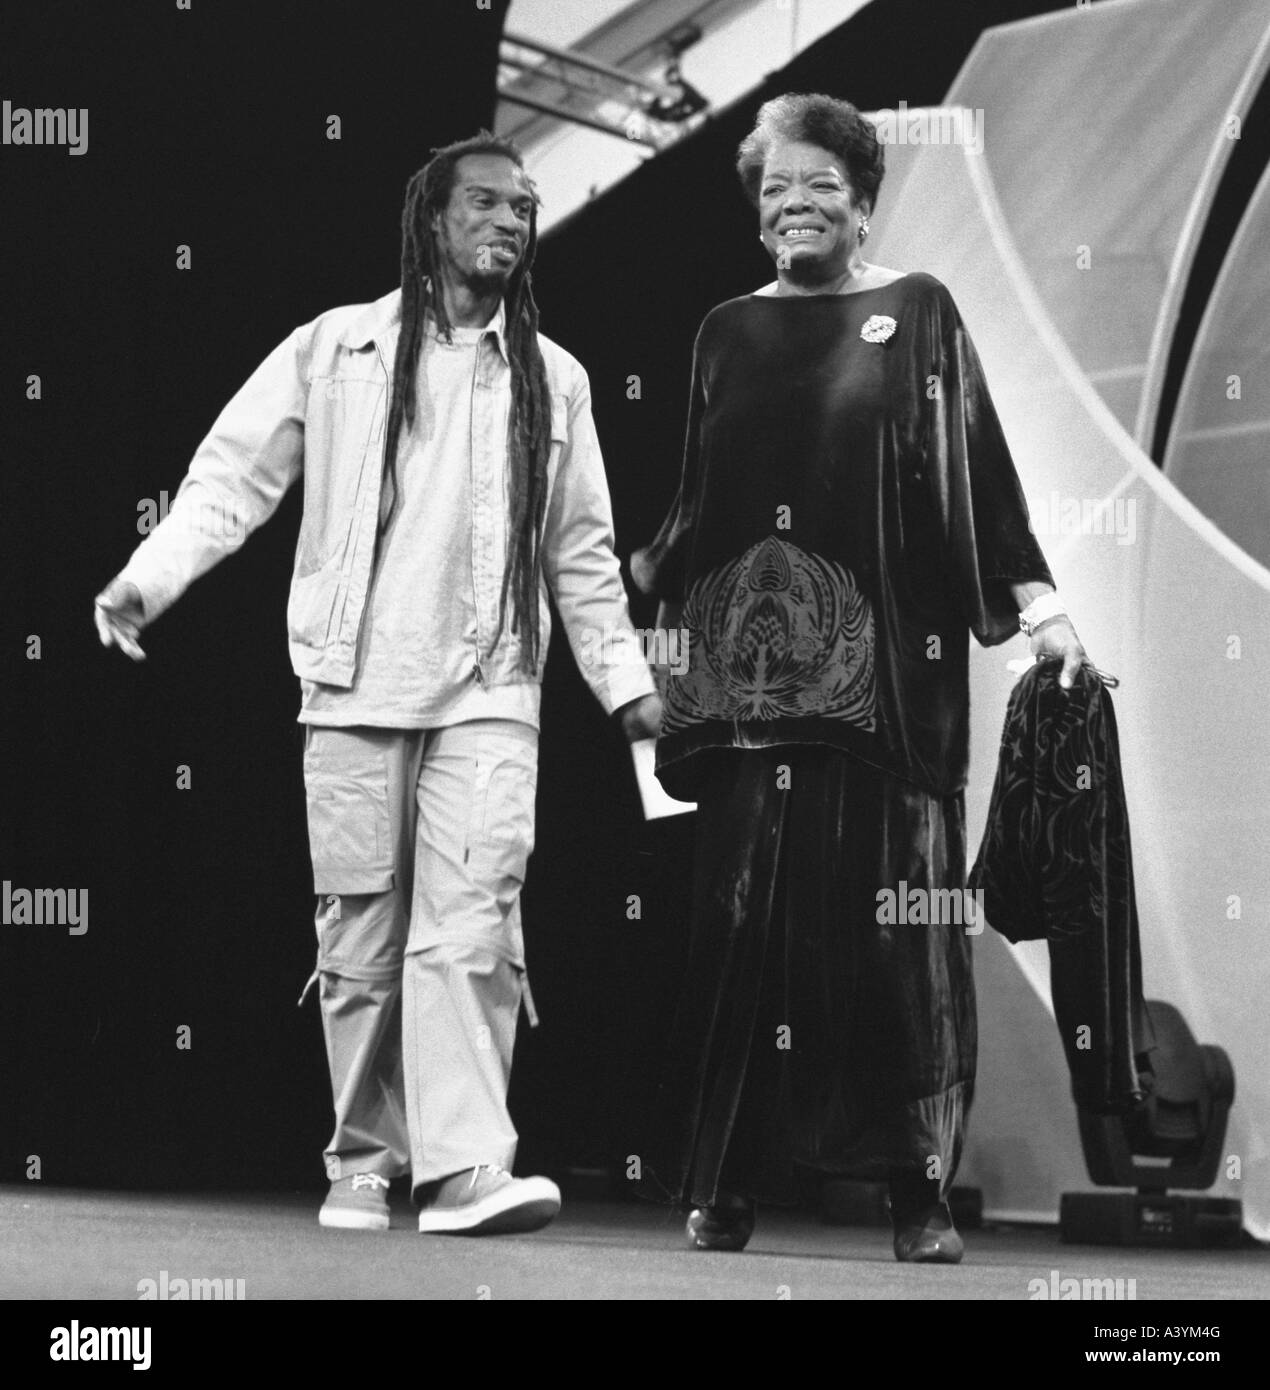 Benjamin Zephaniah and Maya Angelou together on stage at the 2002 Hay Festival, Hay-on-Wye, Wales, UK    KATHY DEWITT Stock Photo